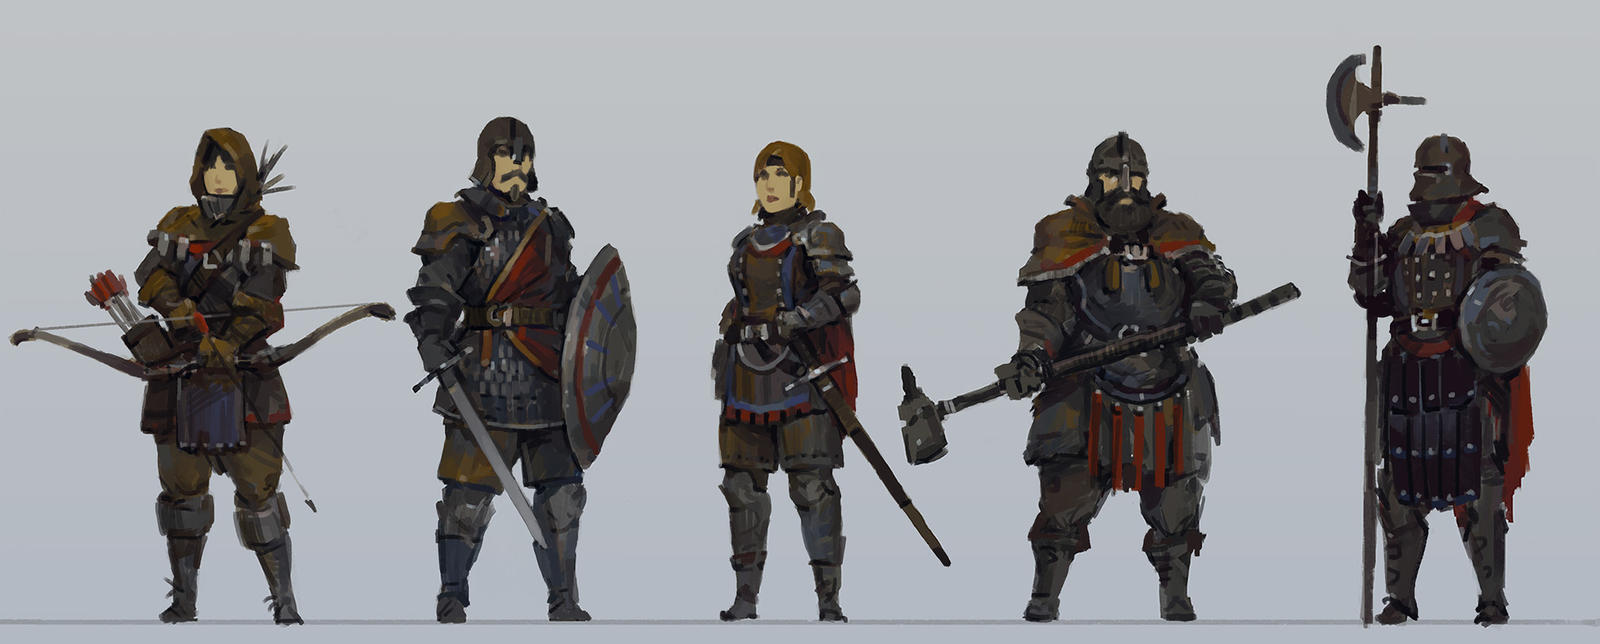 medieval_character_concepts_by_kjkallio-d7wz324.jpg